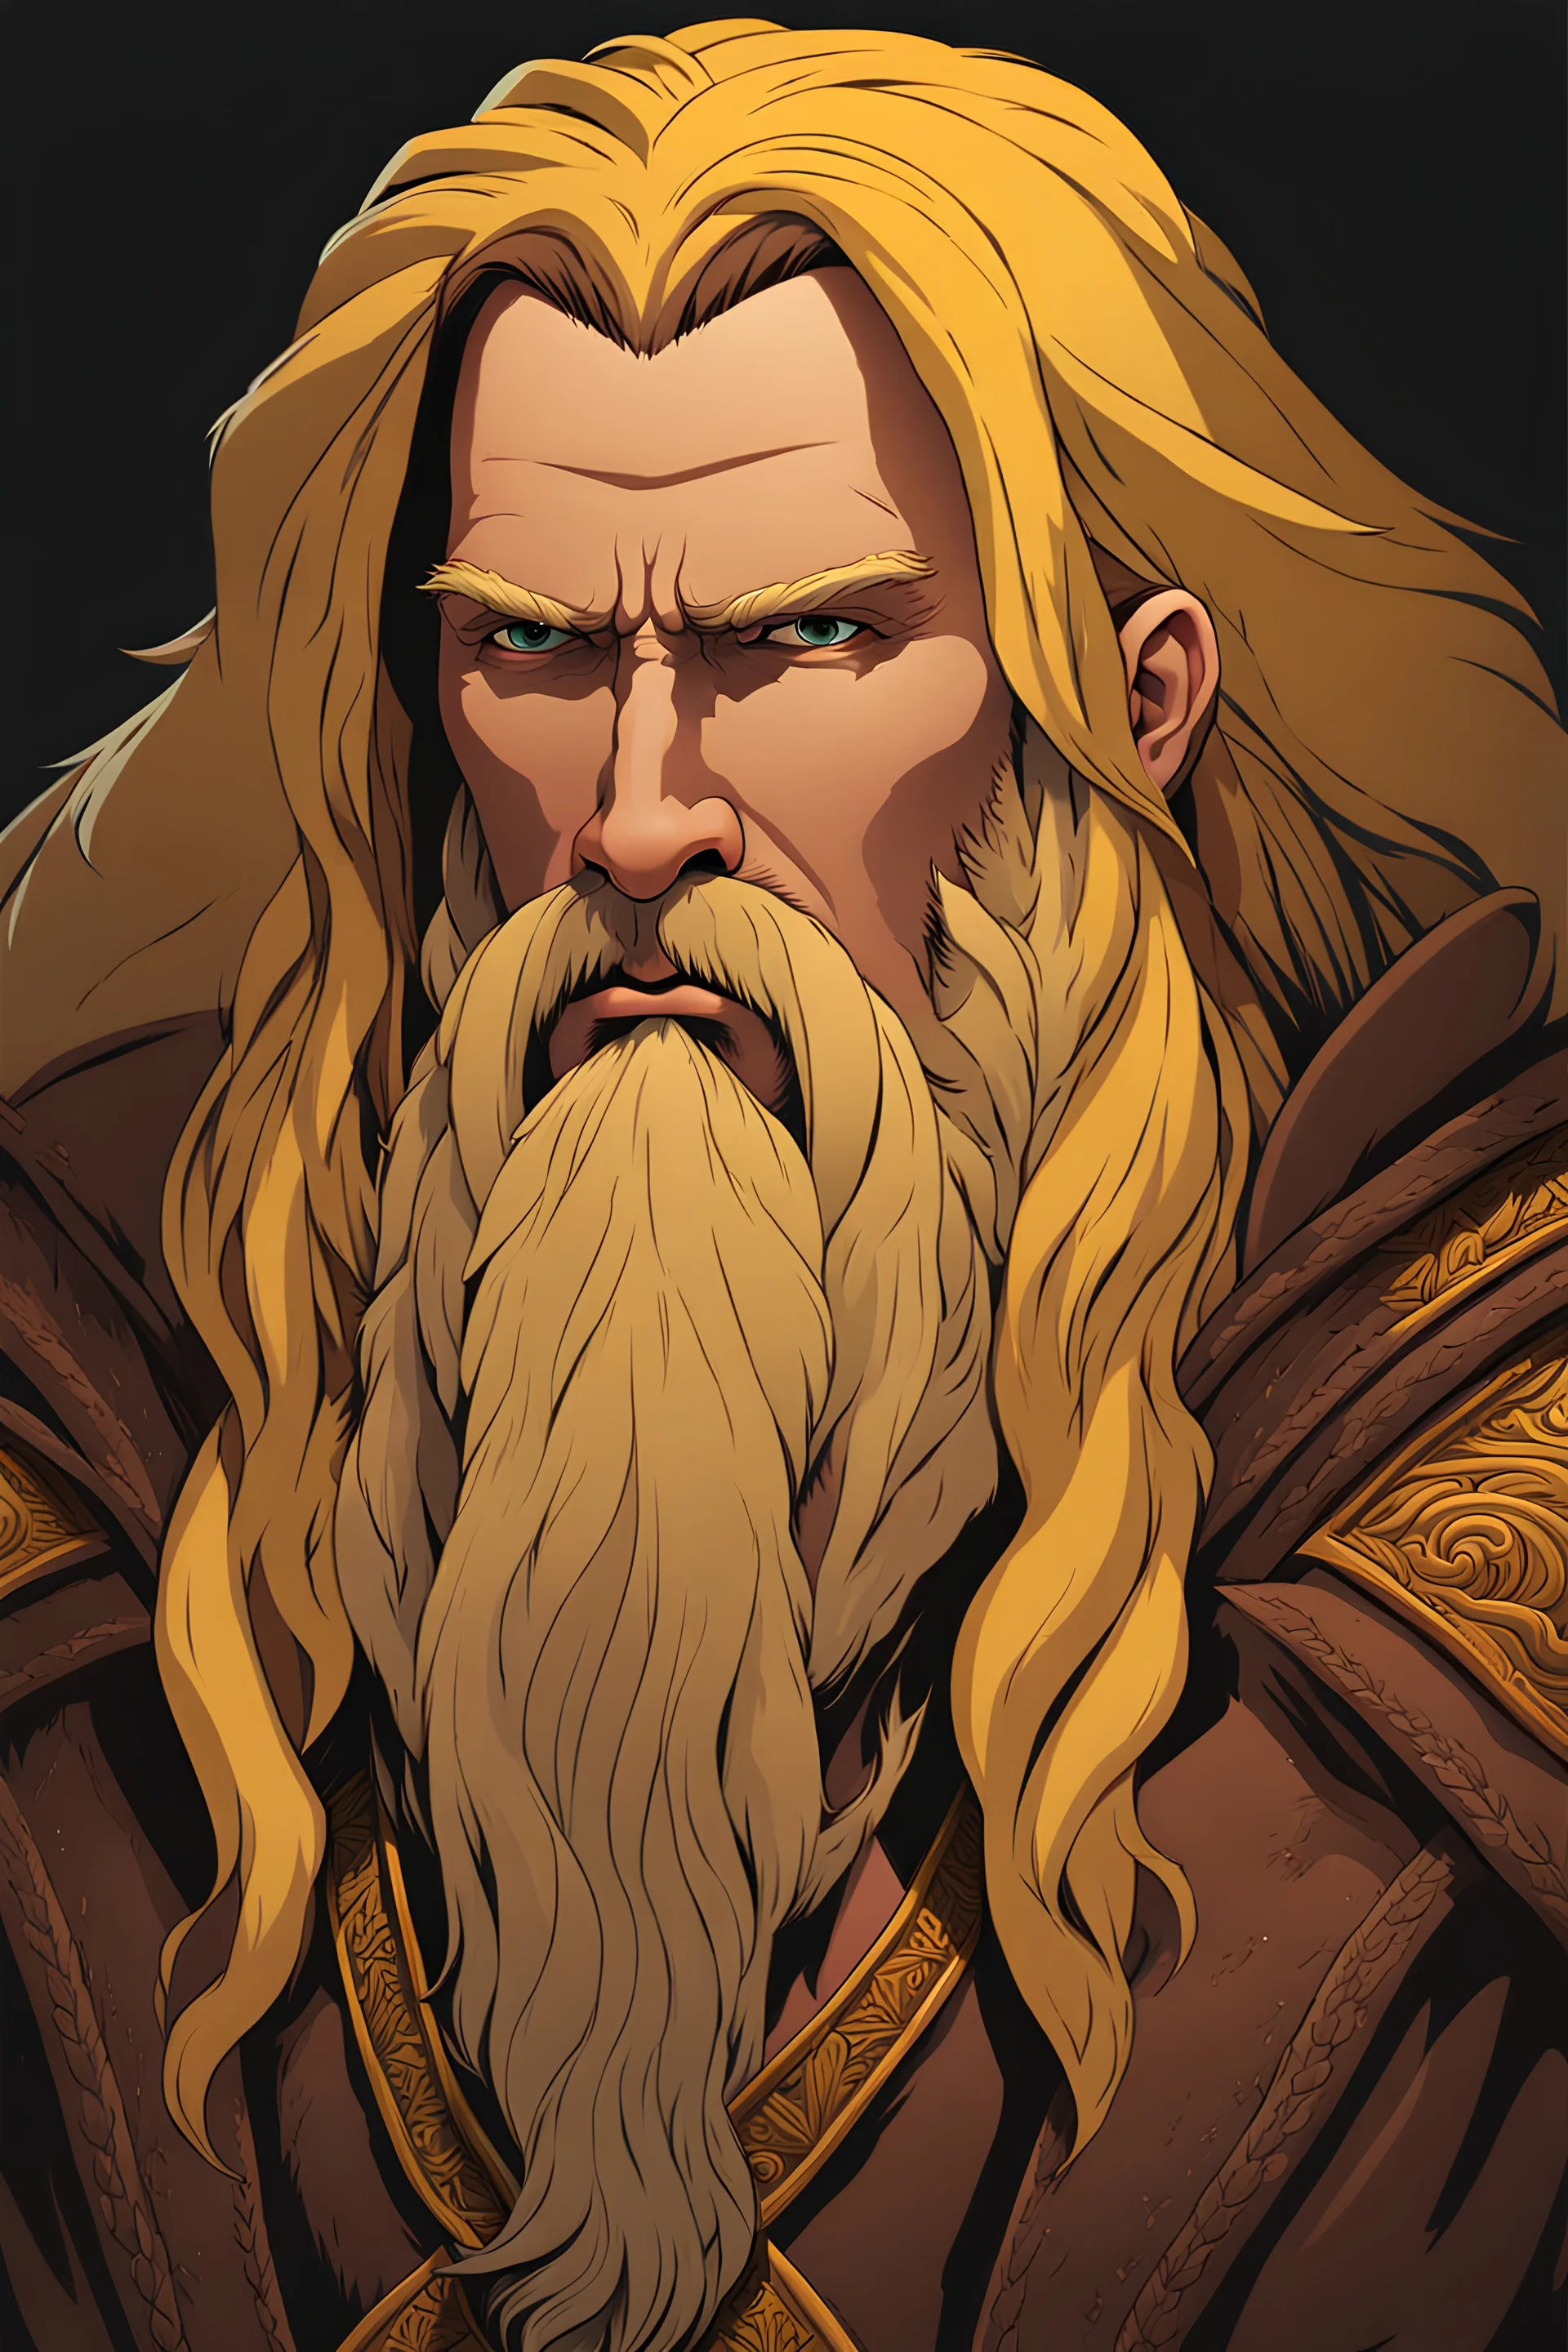 big middle aged man in a poor mans dark brown travelers cloth. he has long, unruly yellow hair and unruly yellow beard. show all of the head. anatomically correct hands. perfect hands. fantasy setting. concept art, mid shot, intricately detailed, color depth, dramatic, 2/3 face angle, side light, colorful background.